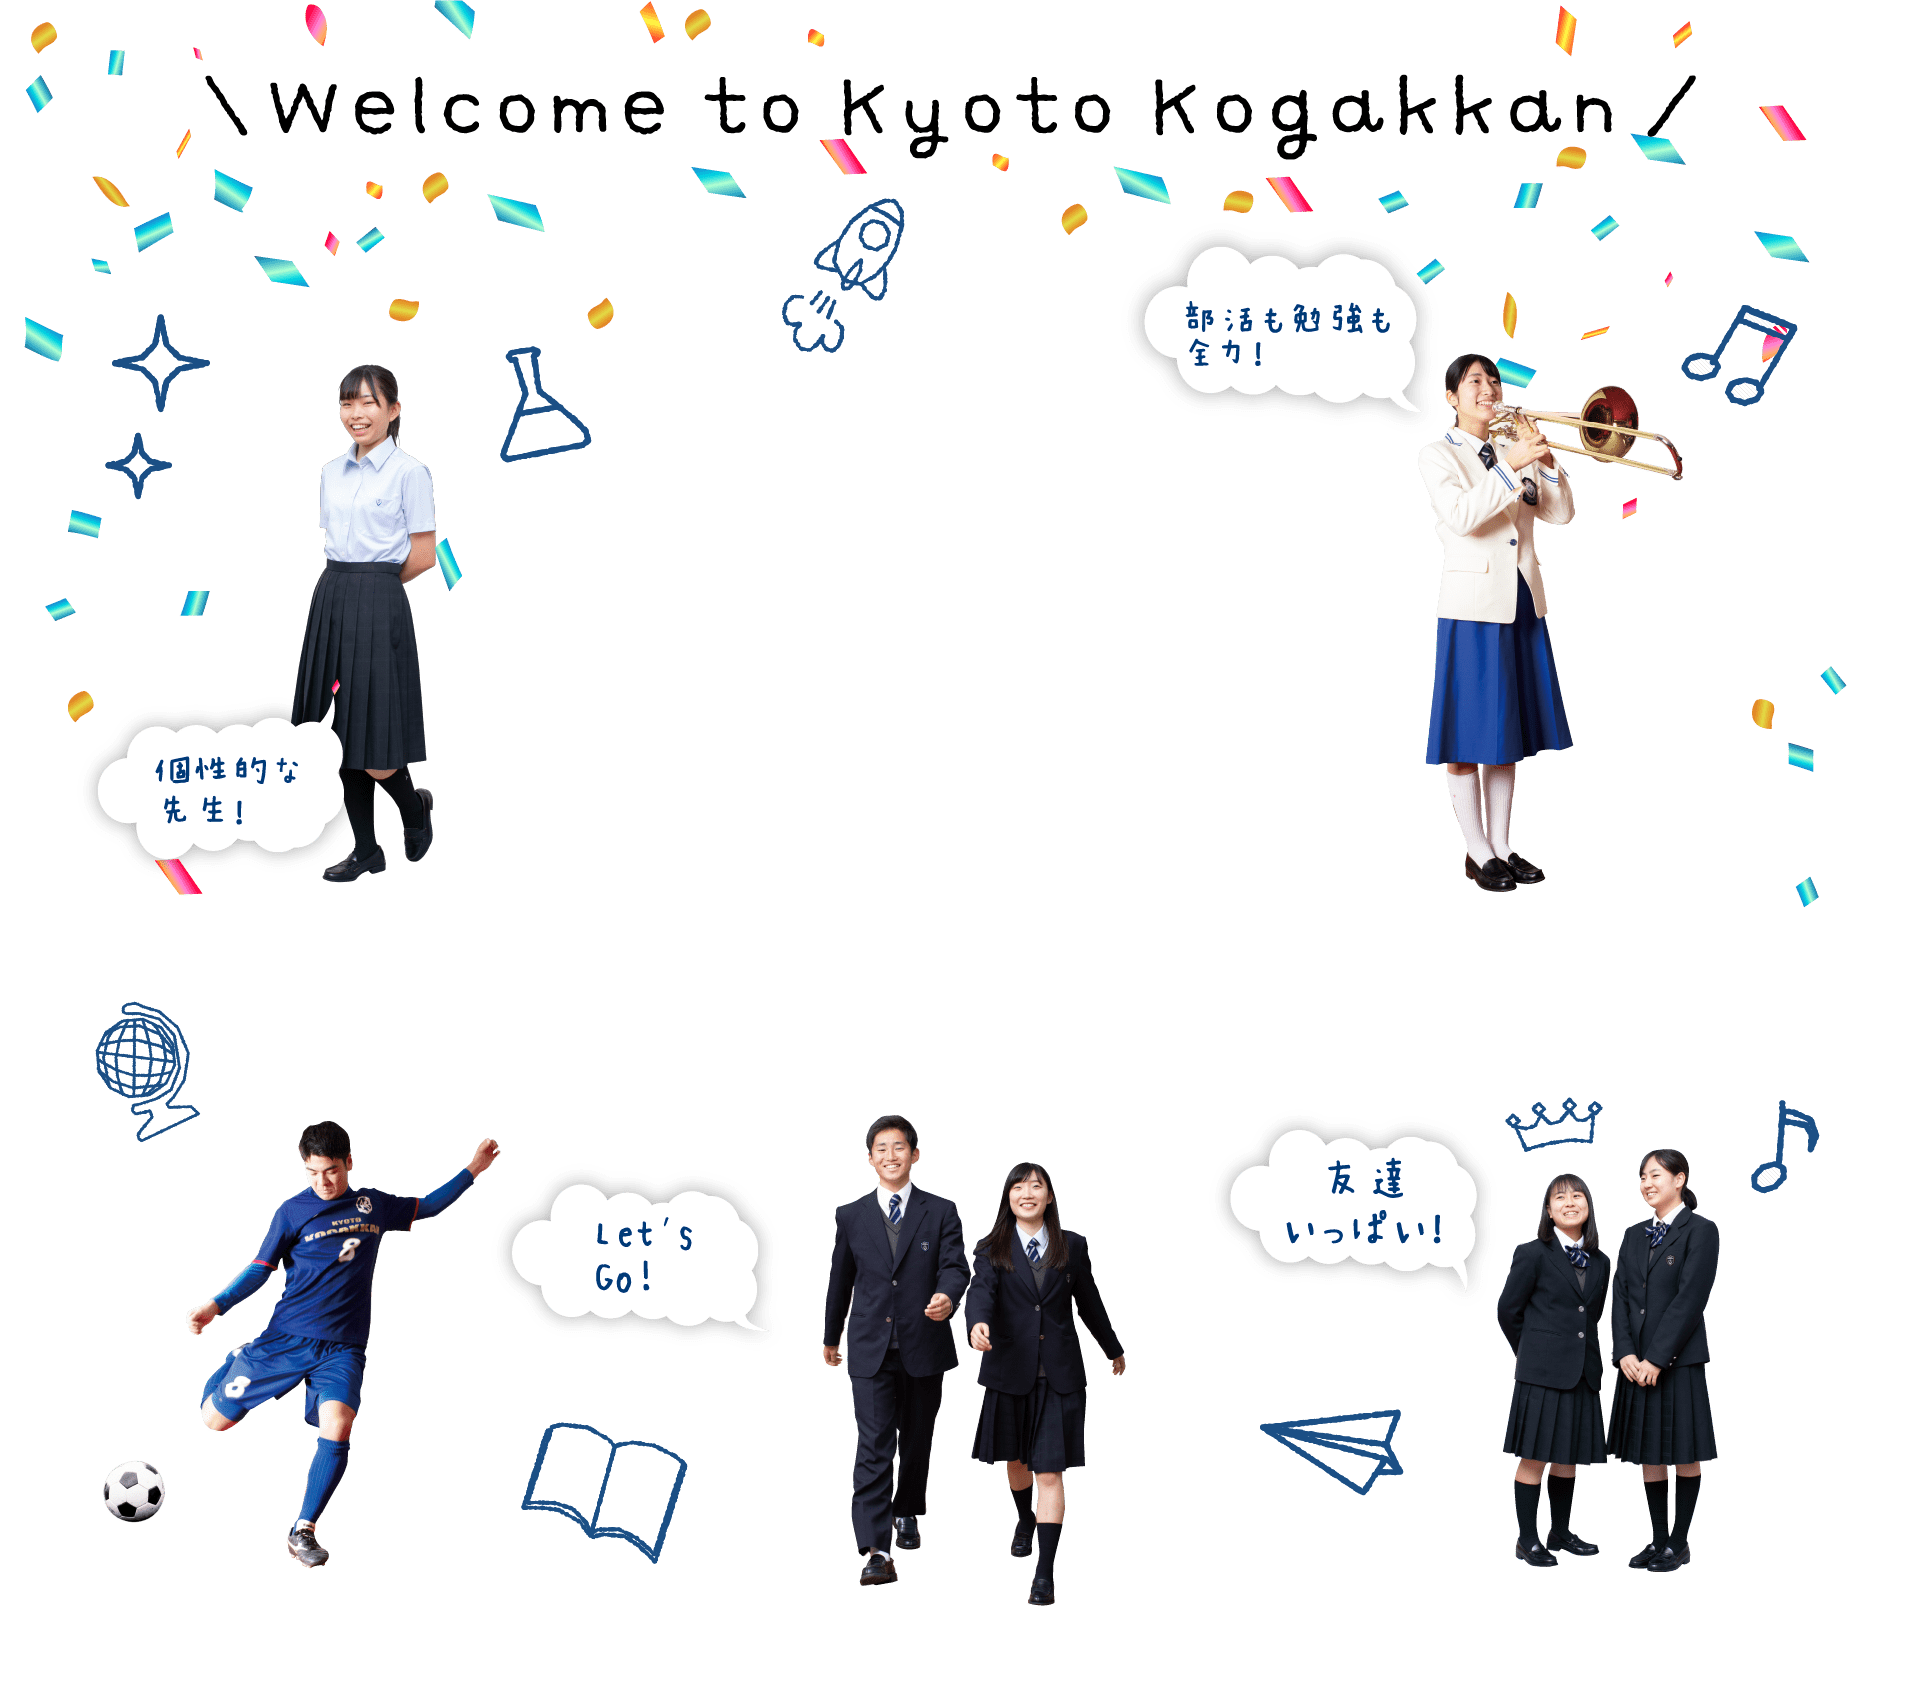 ＼Welcome to Kyoto Kogakkan／ WEB OPEN CAMPUS